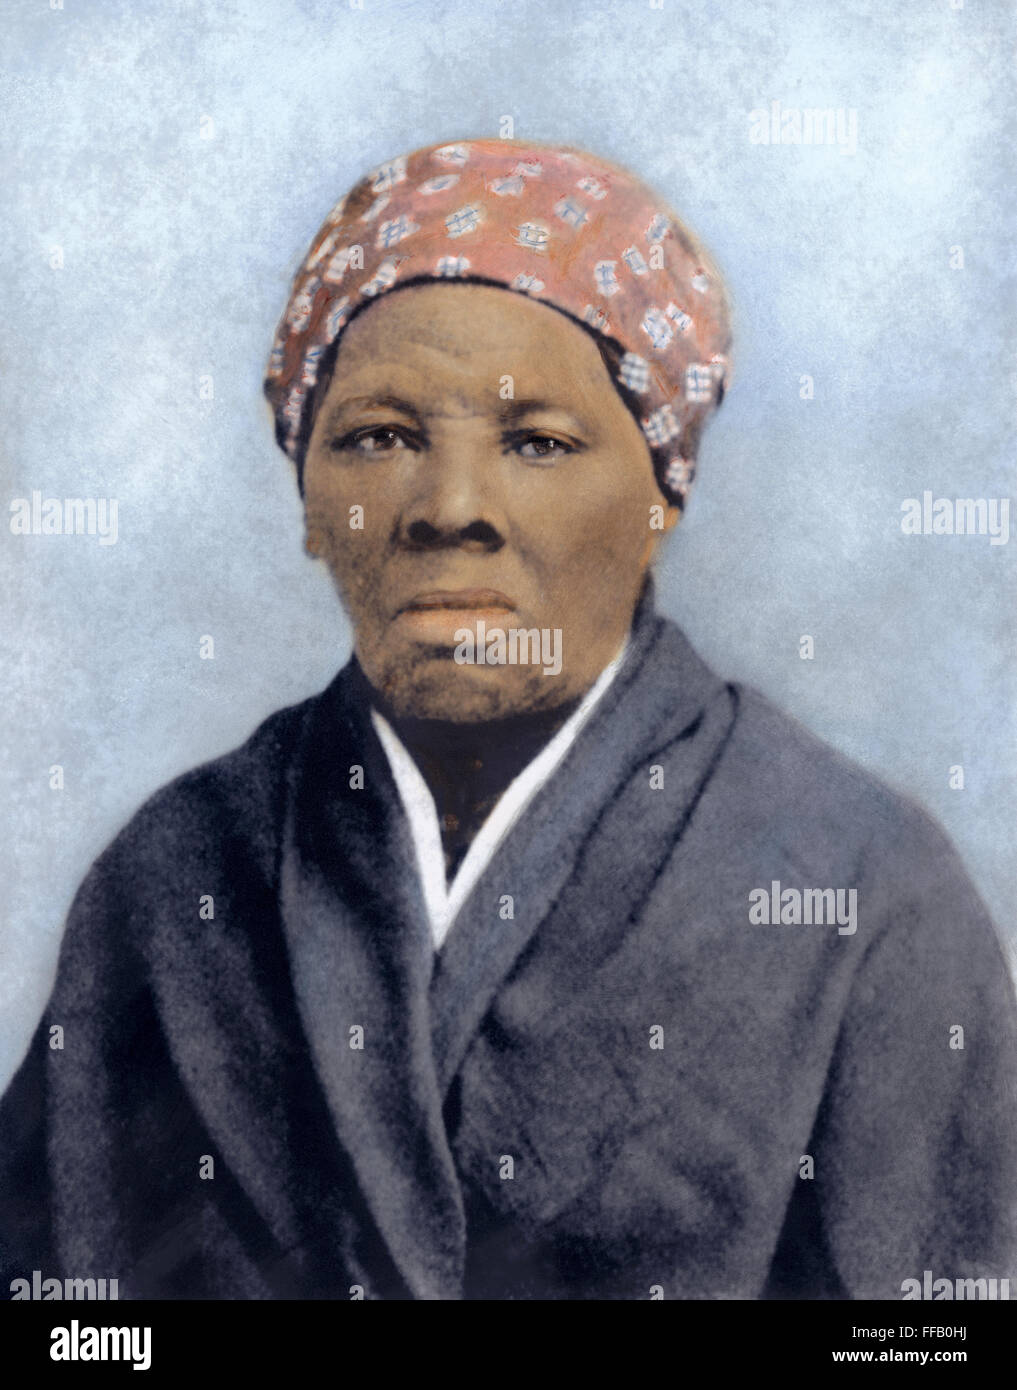 HARRIET TUBMAN (1823-1913). /nAmerican abolitionist. Oil over a photograph, 1895. Stock Photo